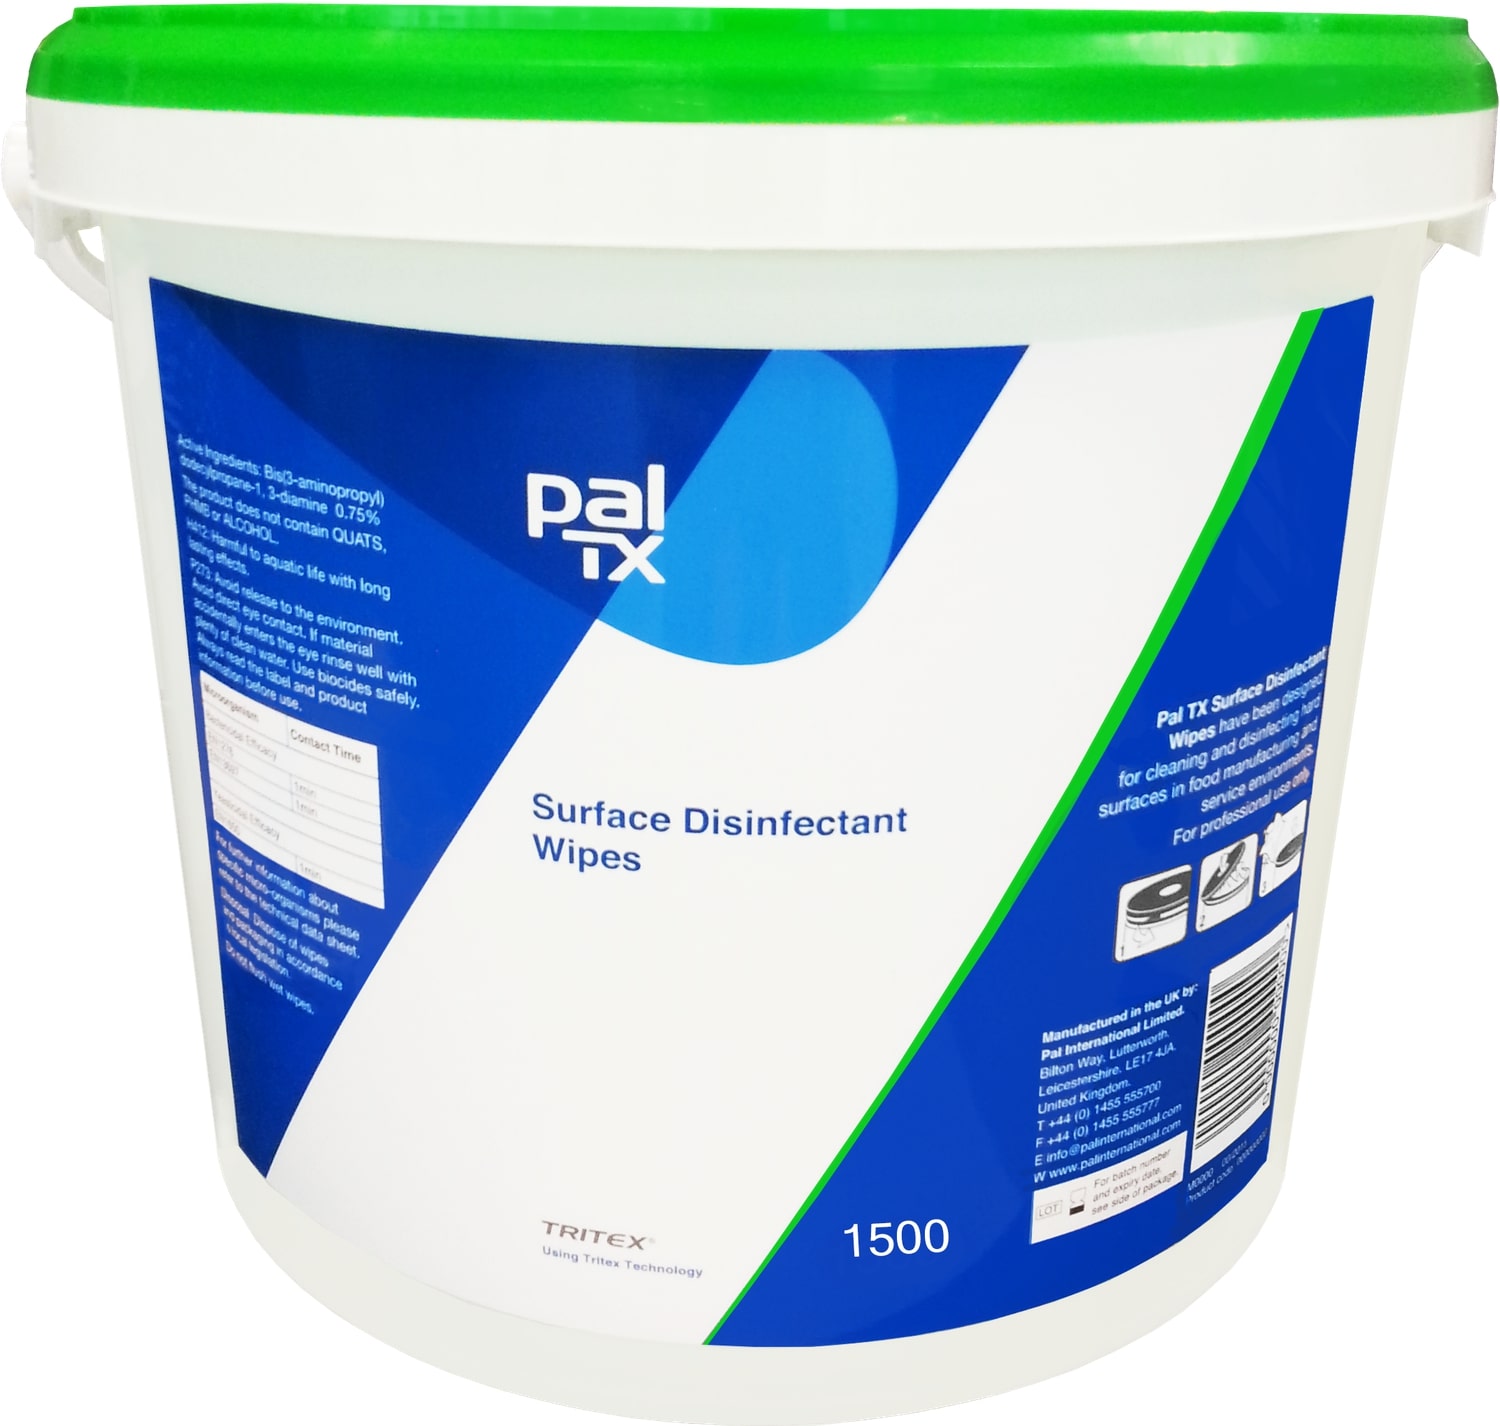 PAL TX SURFACE DISINFECTANT WIPES X1500